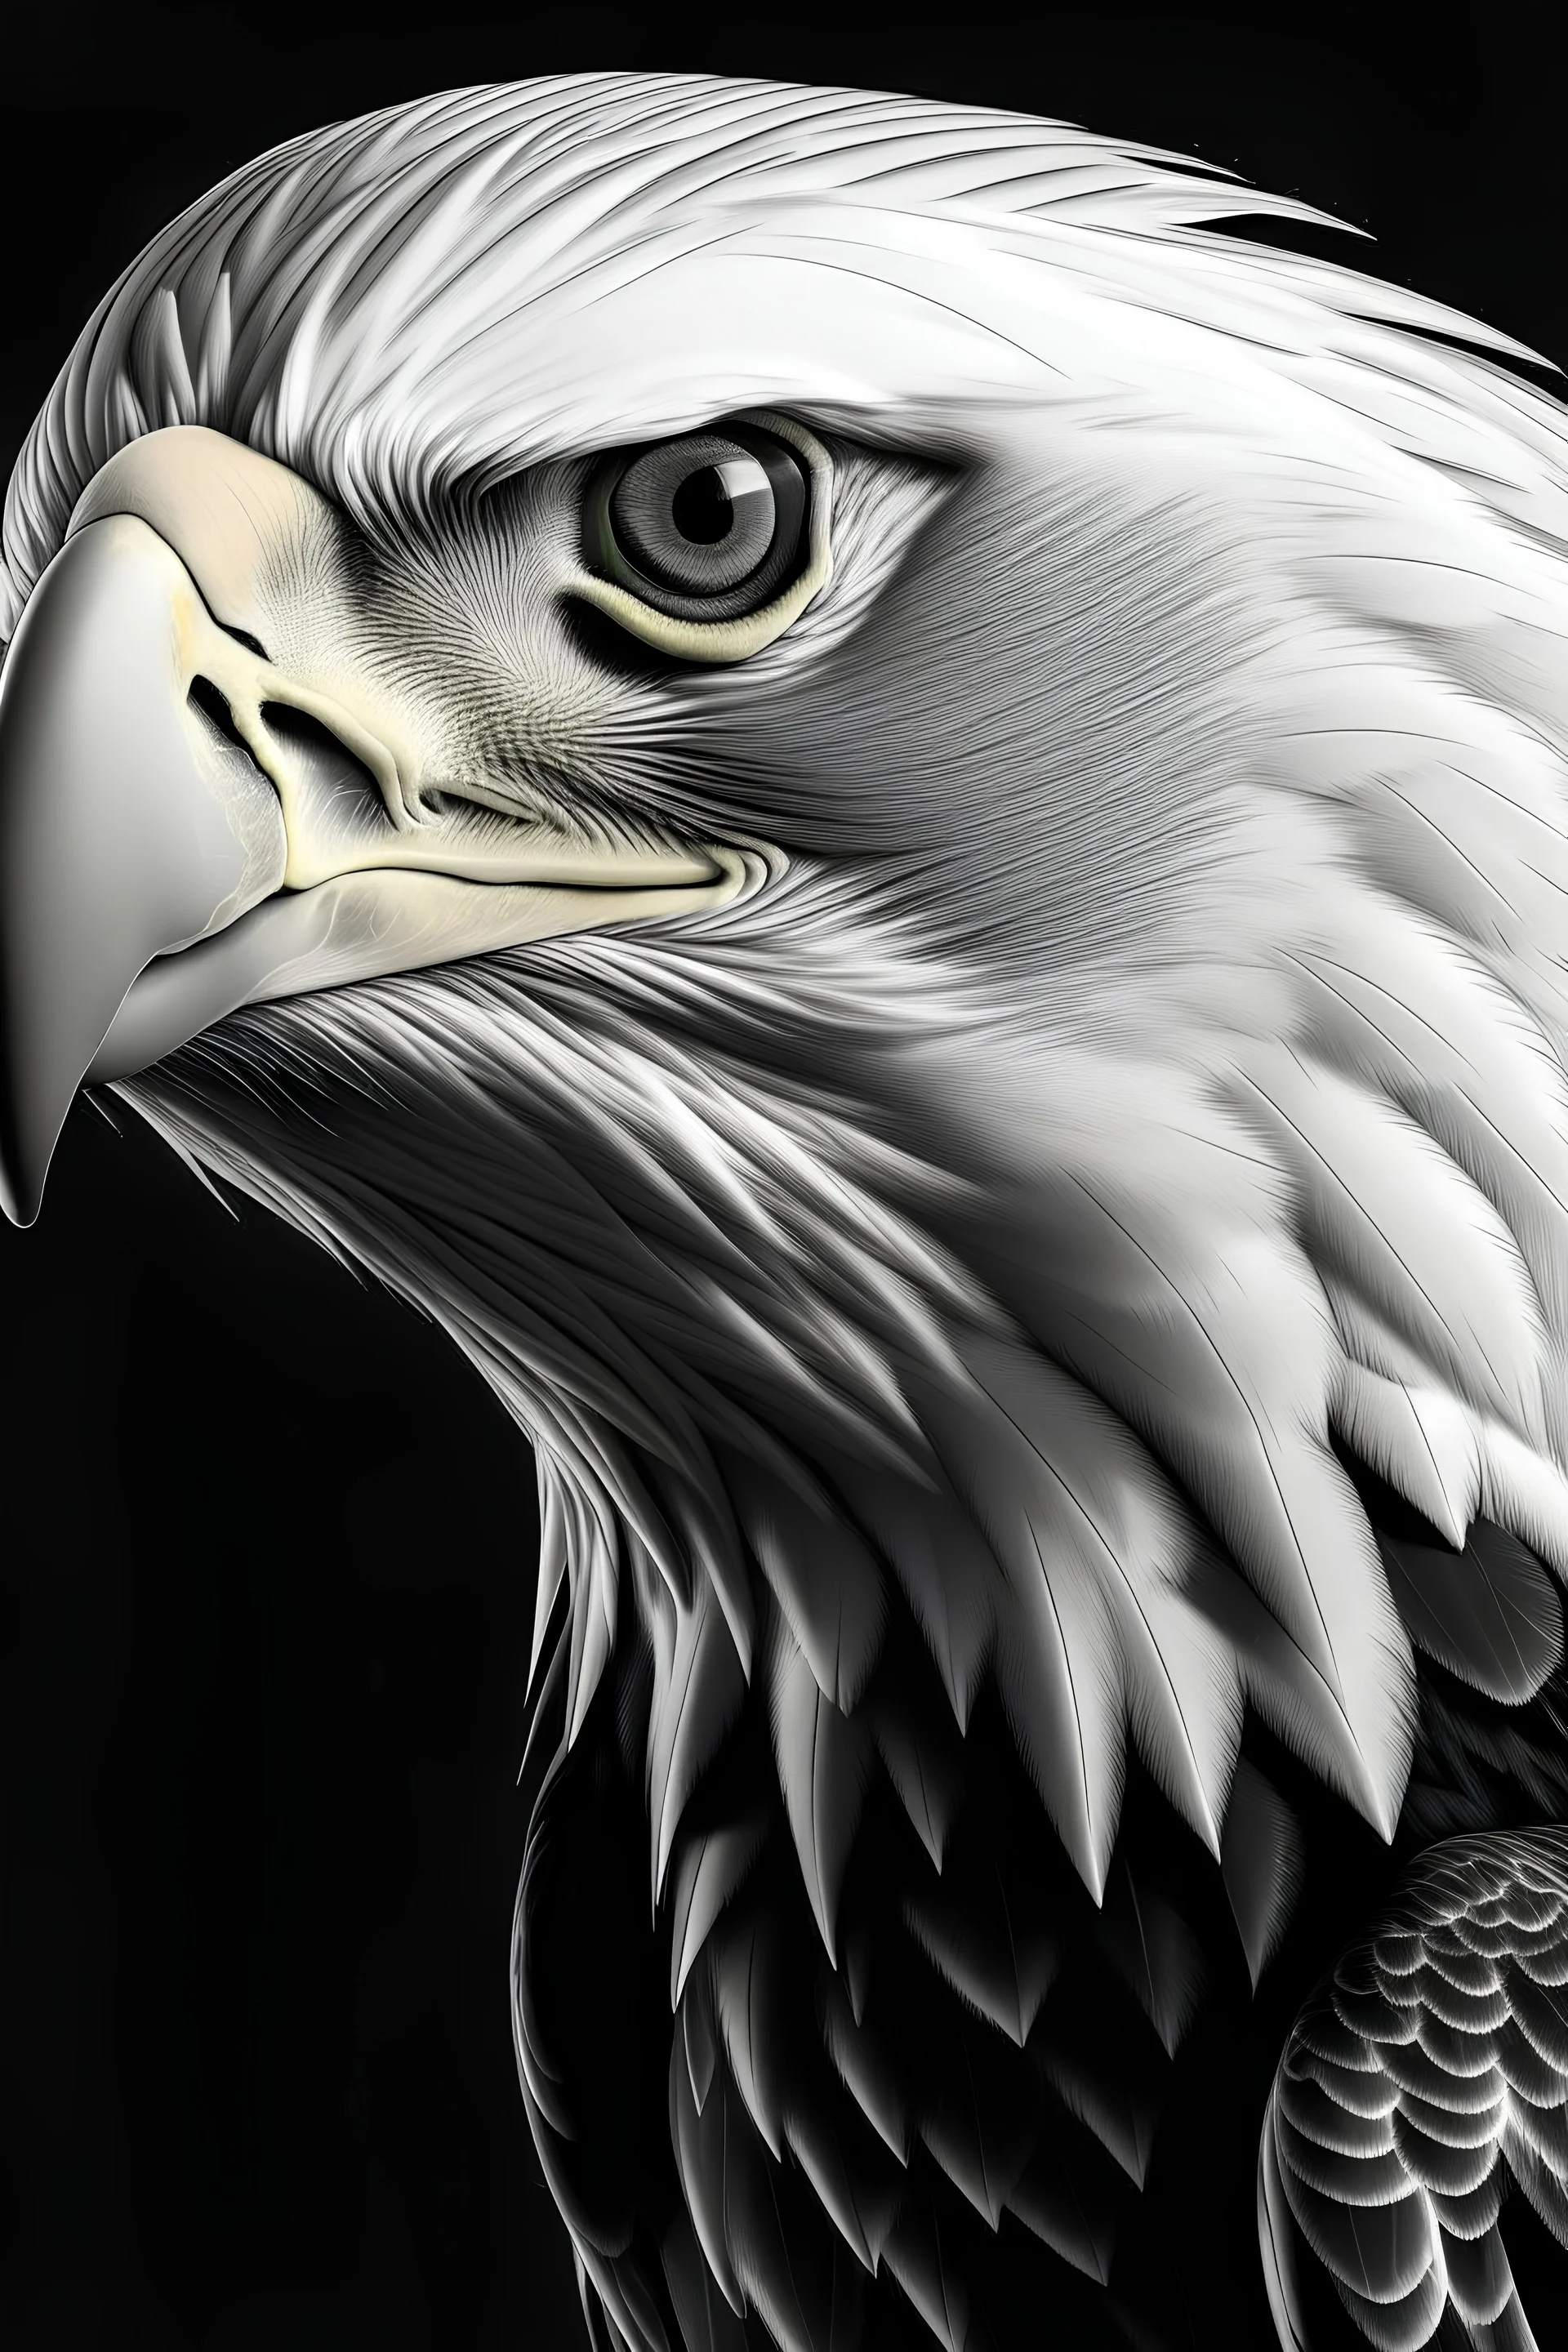 side of the bald eagle's face with black and white details